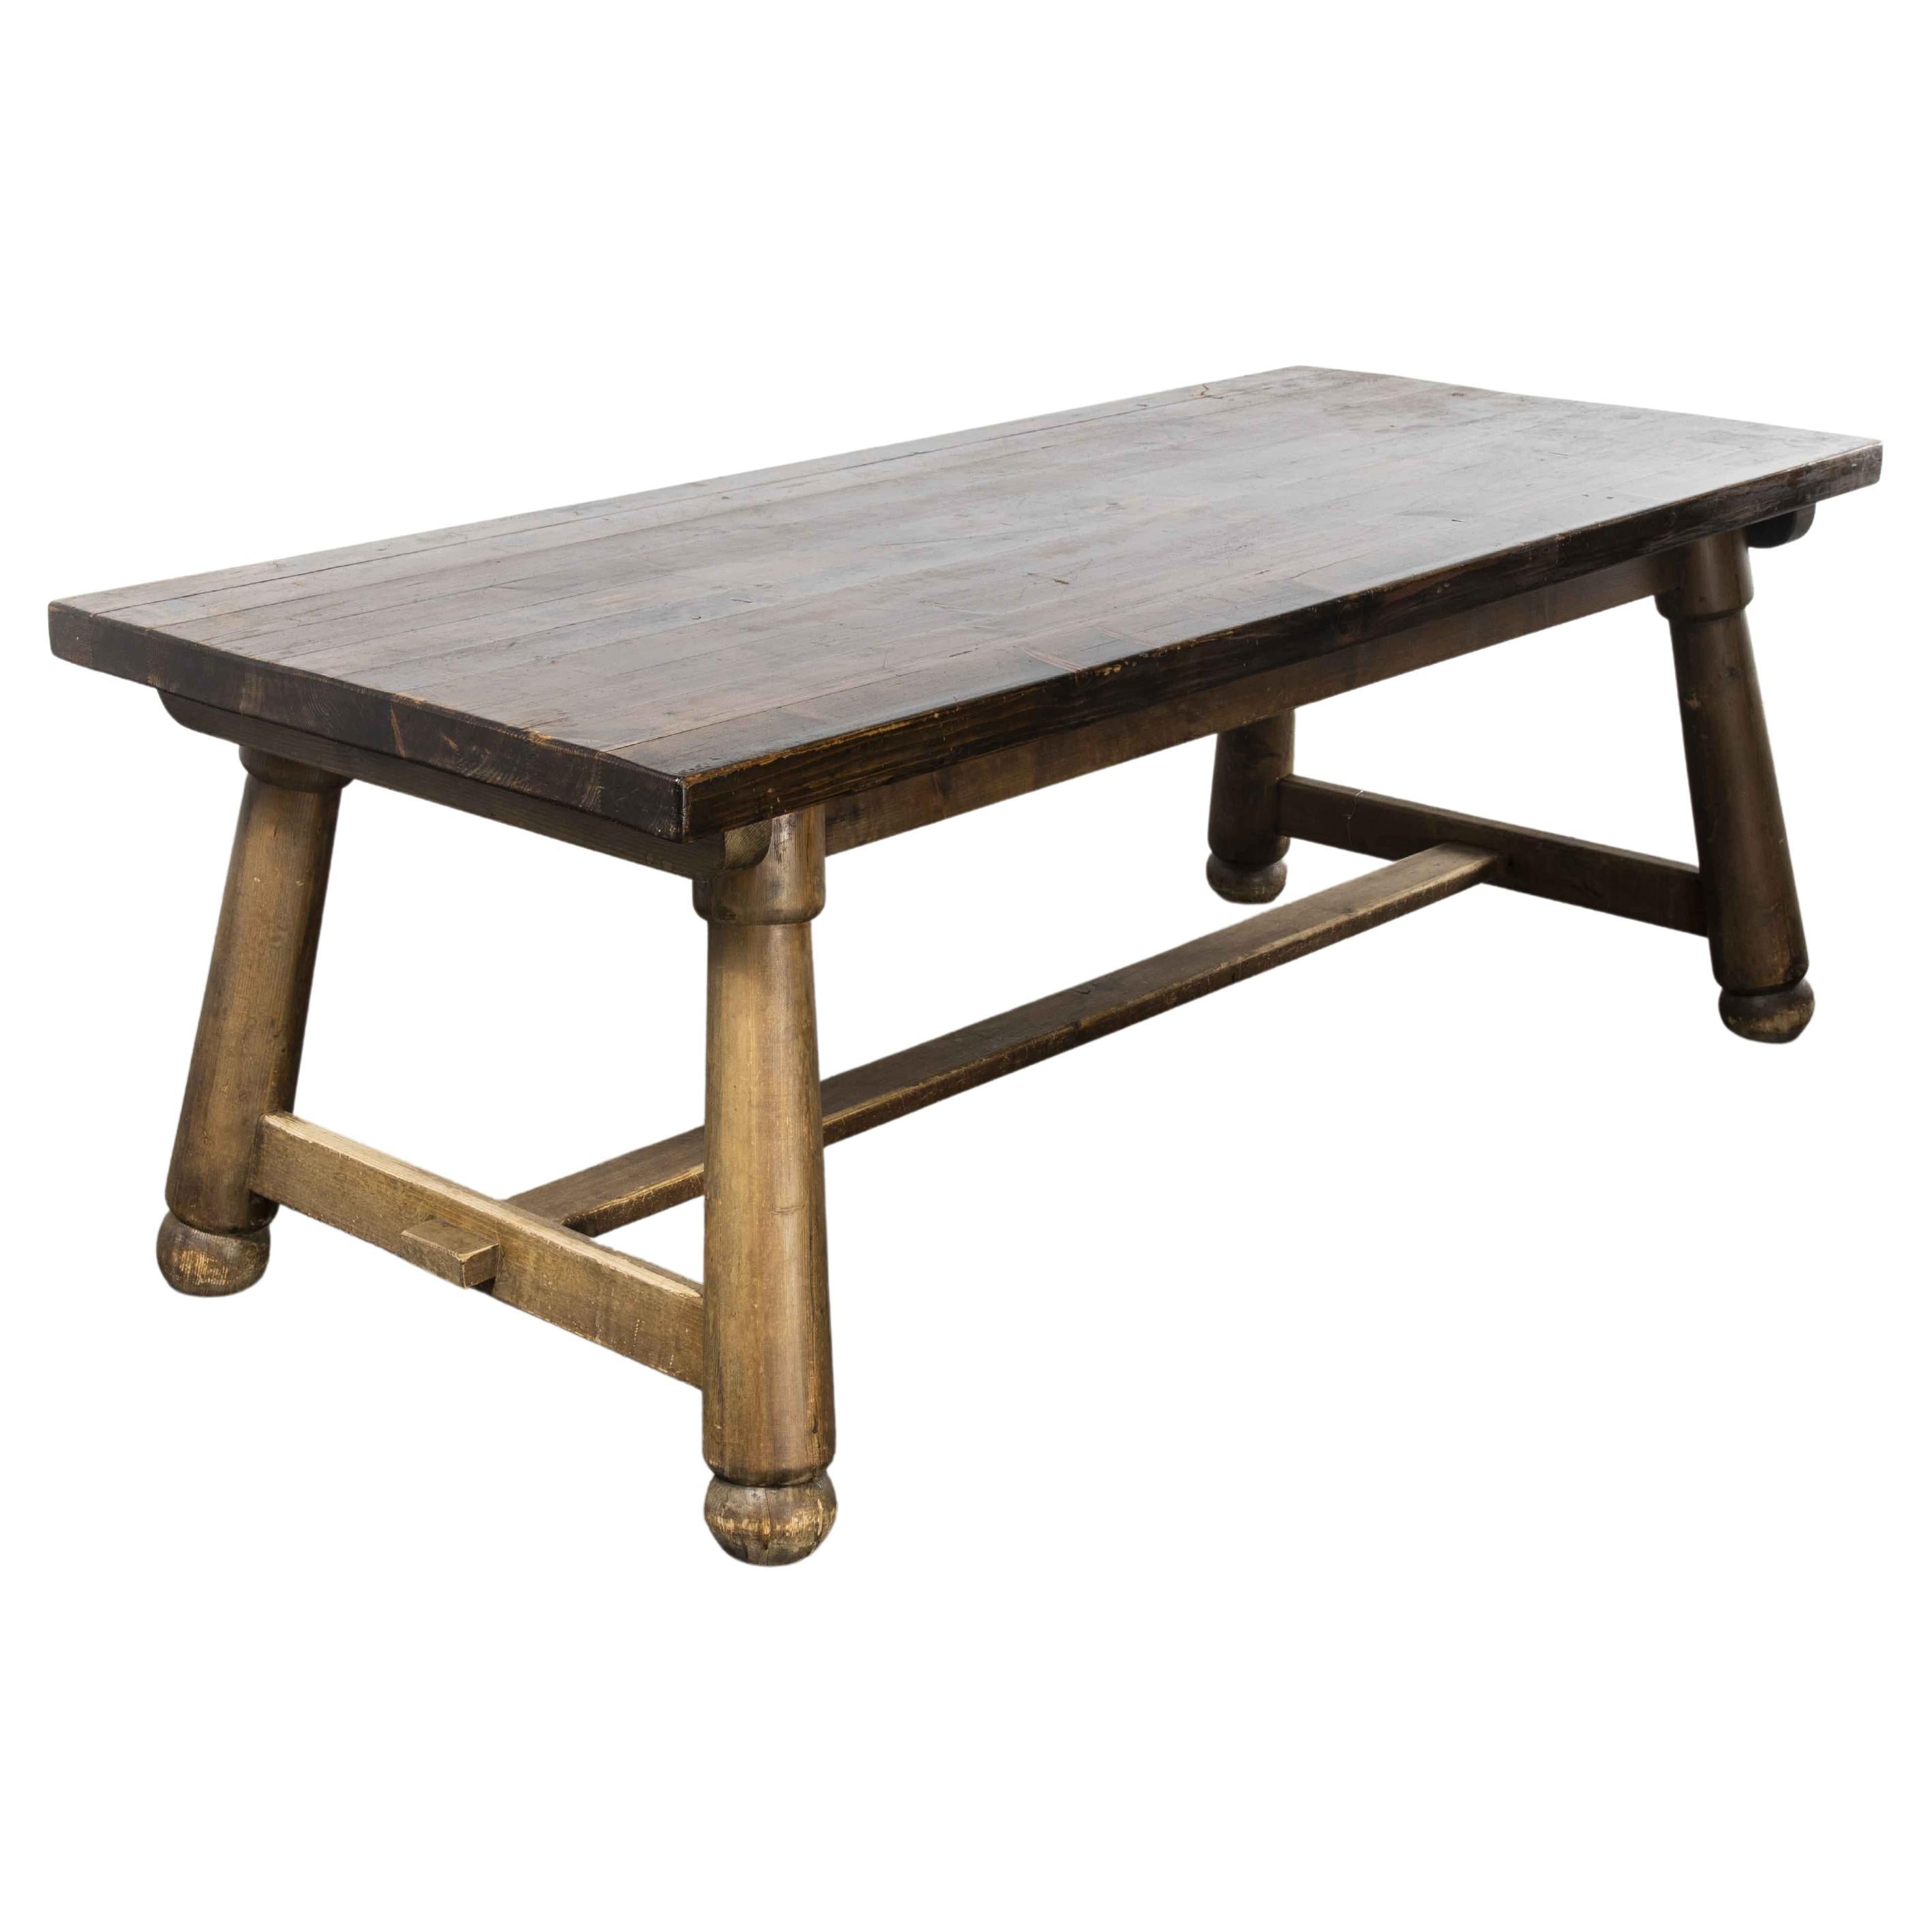 1950’s Chunky French Tavern Table – Rectangular Dining Table For Sale